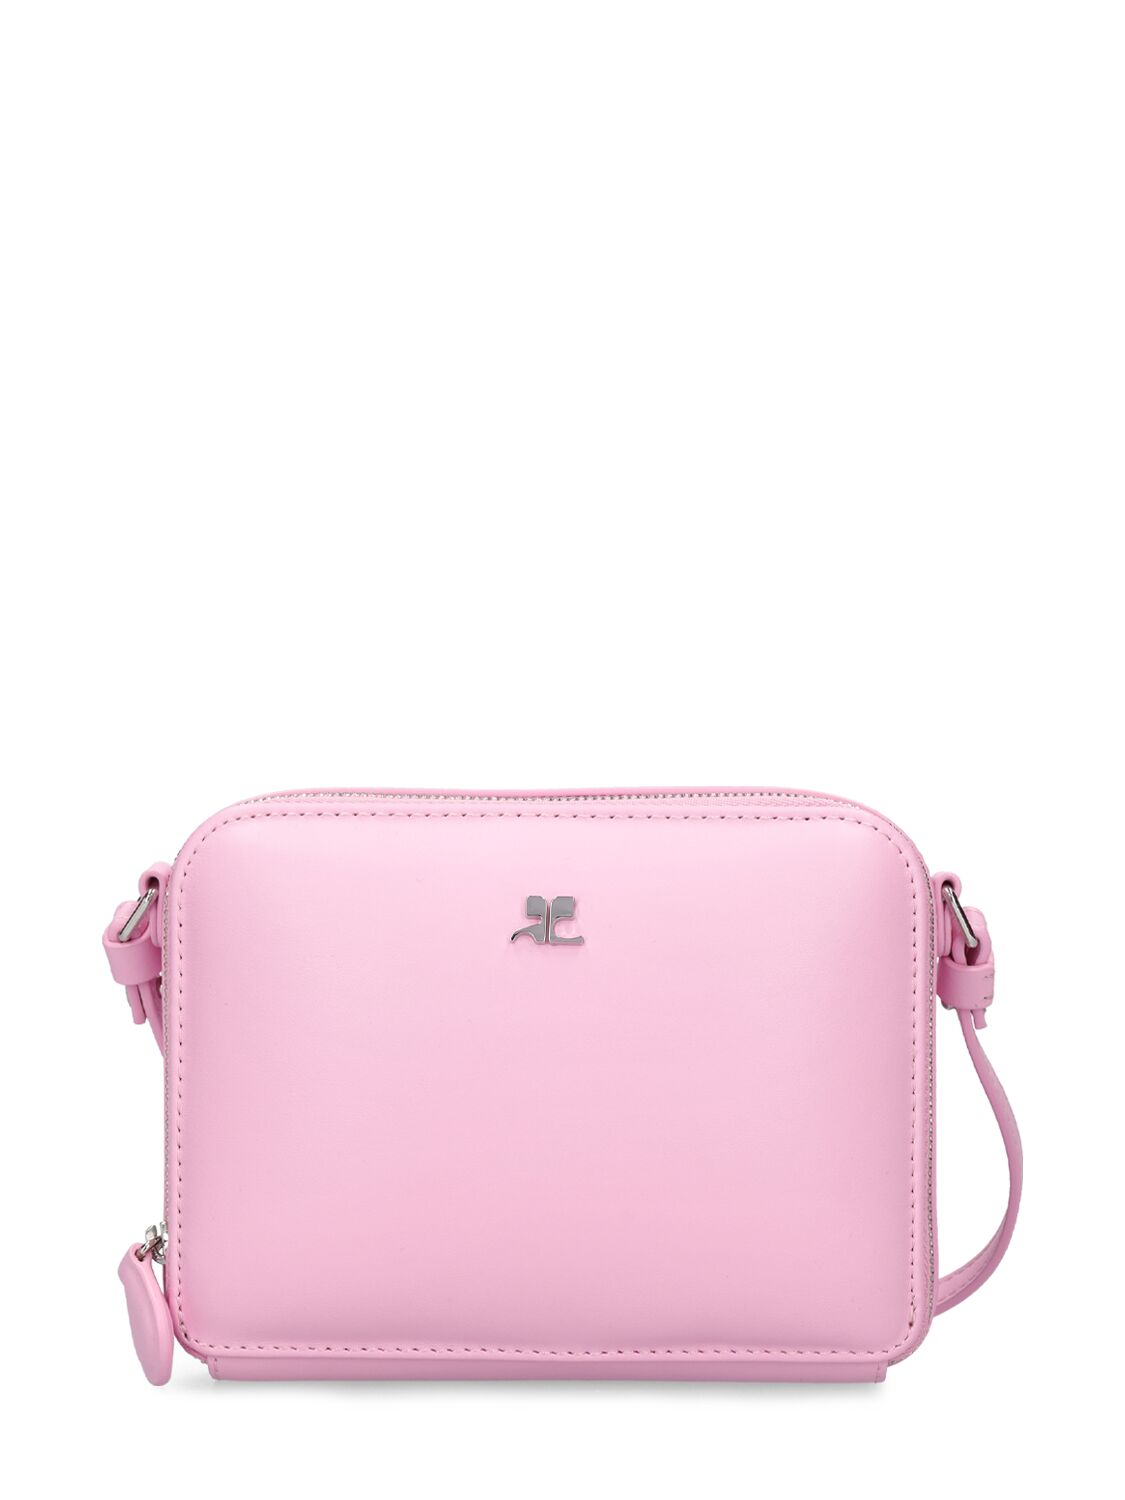 Courrèges Cloud Leather Shoulder Bag In Candy Pink